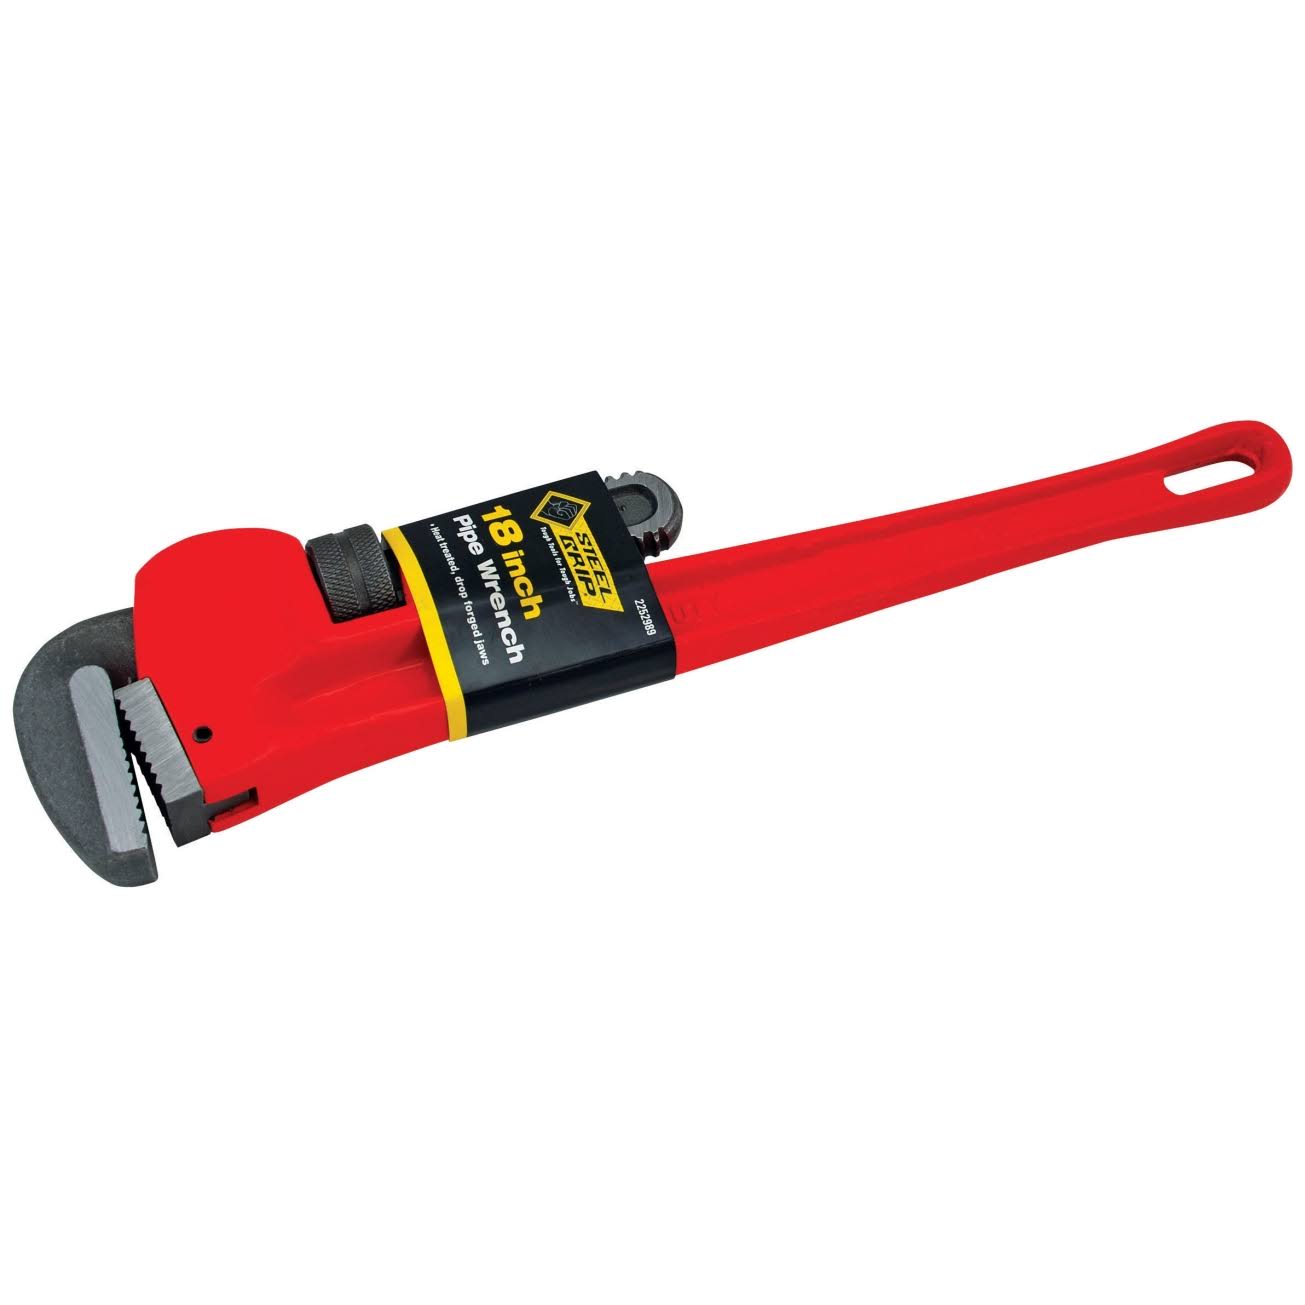 Steel Grip Pipe Wrench - 18"